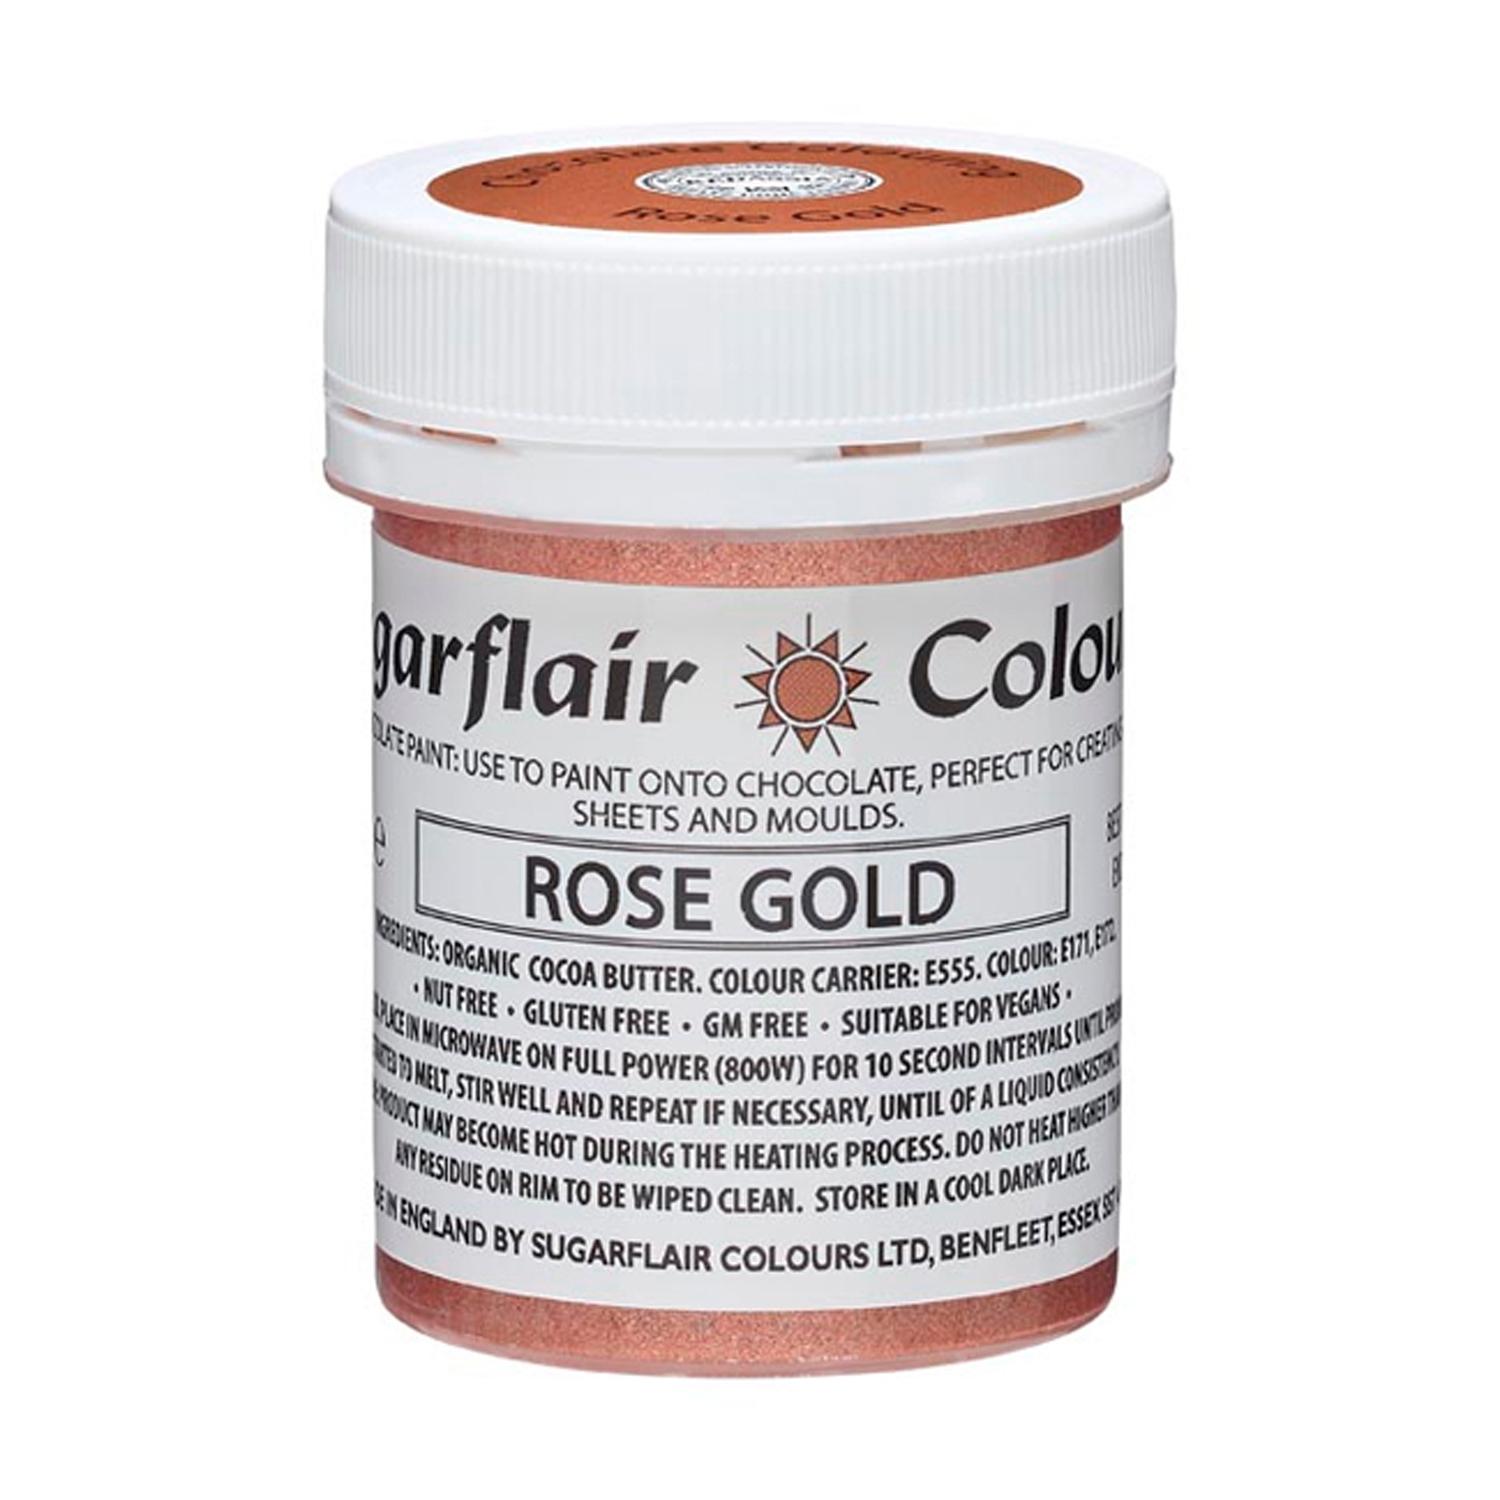 SUGARFLAIR ROSE GOLD CHOCOLATE PAINT 35GMS